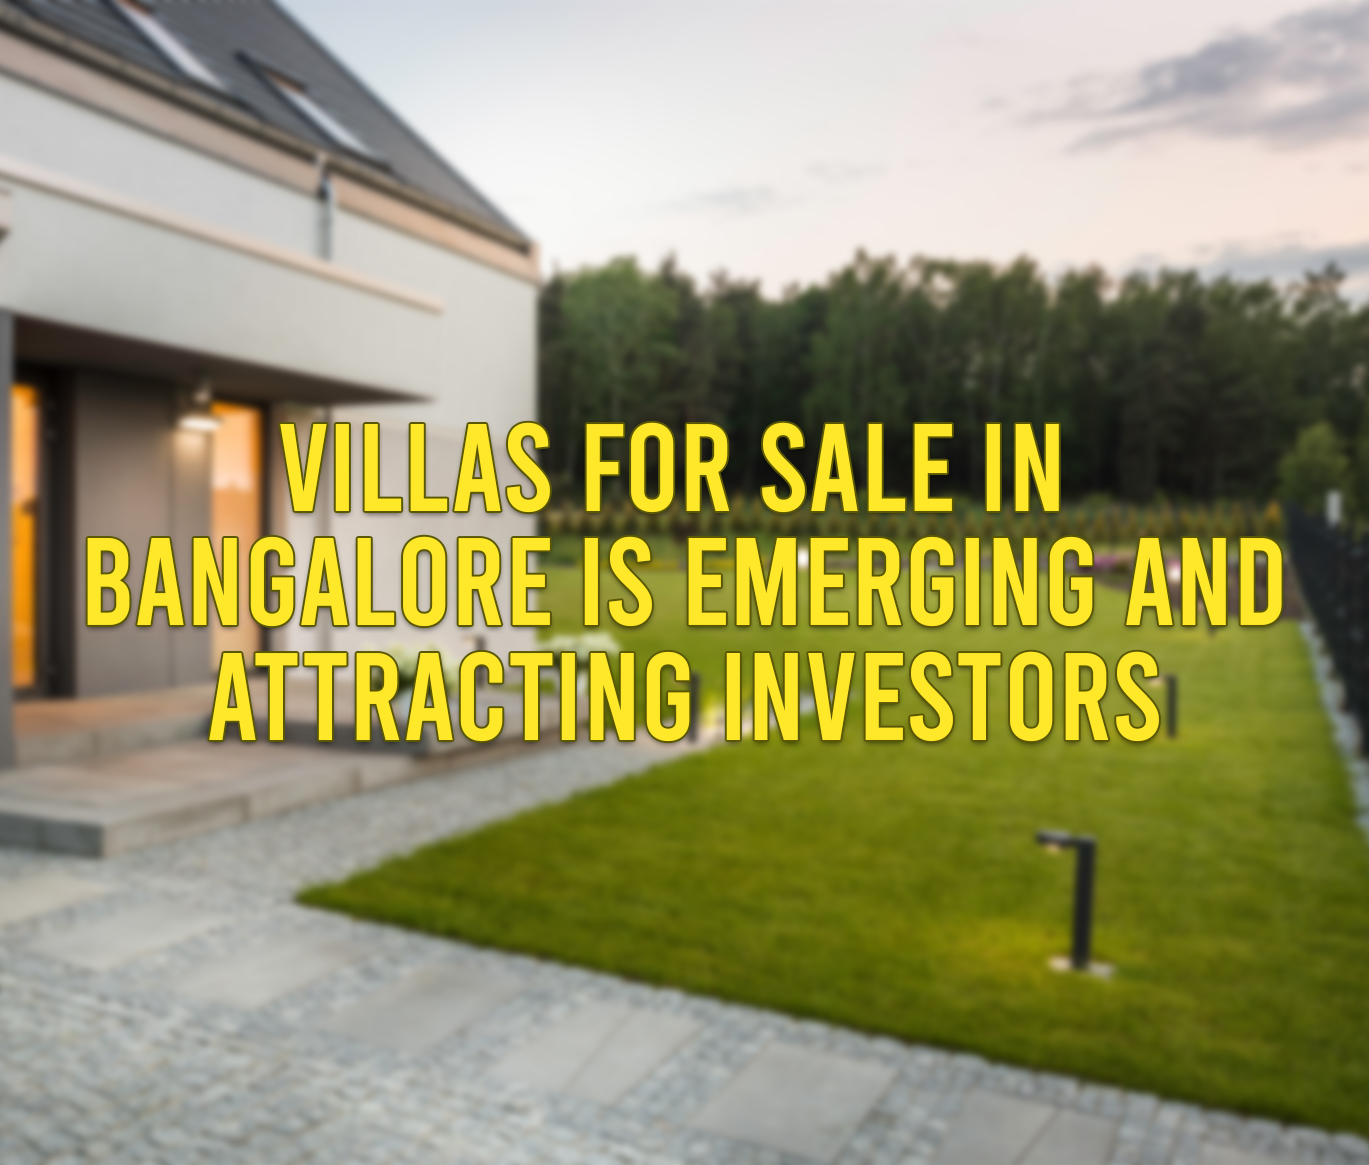 Villas For Sale in Bangalore is Emerging and Attracting Investors